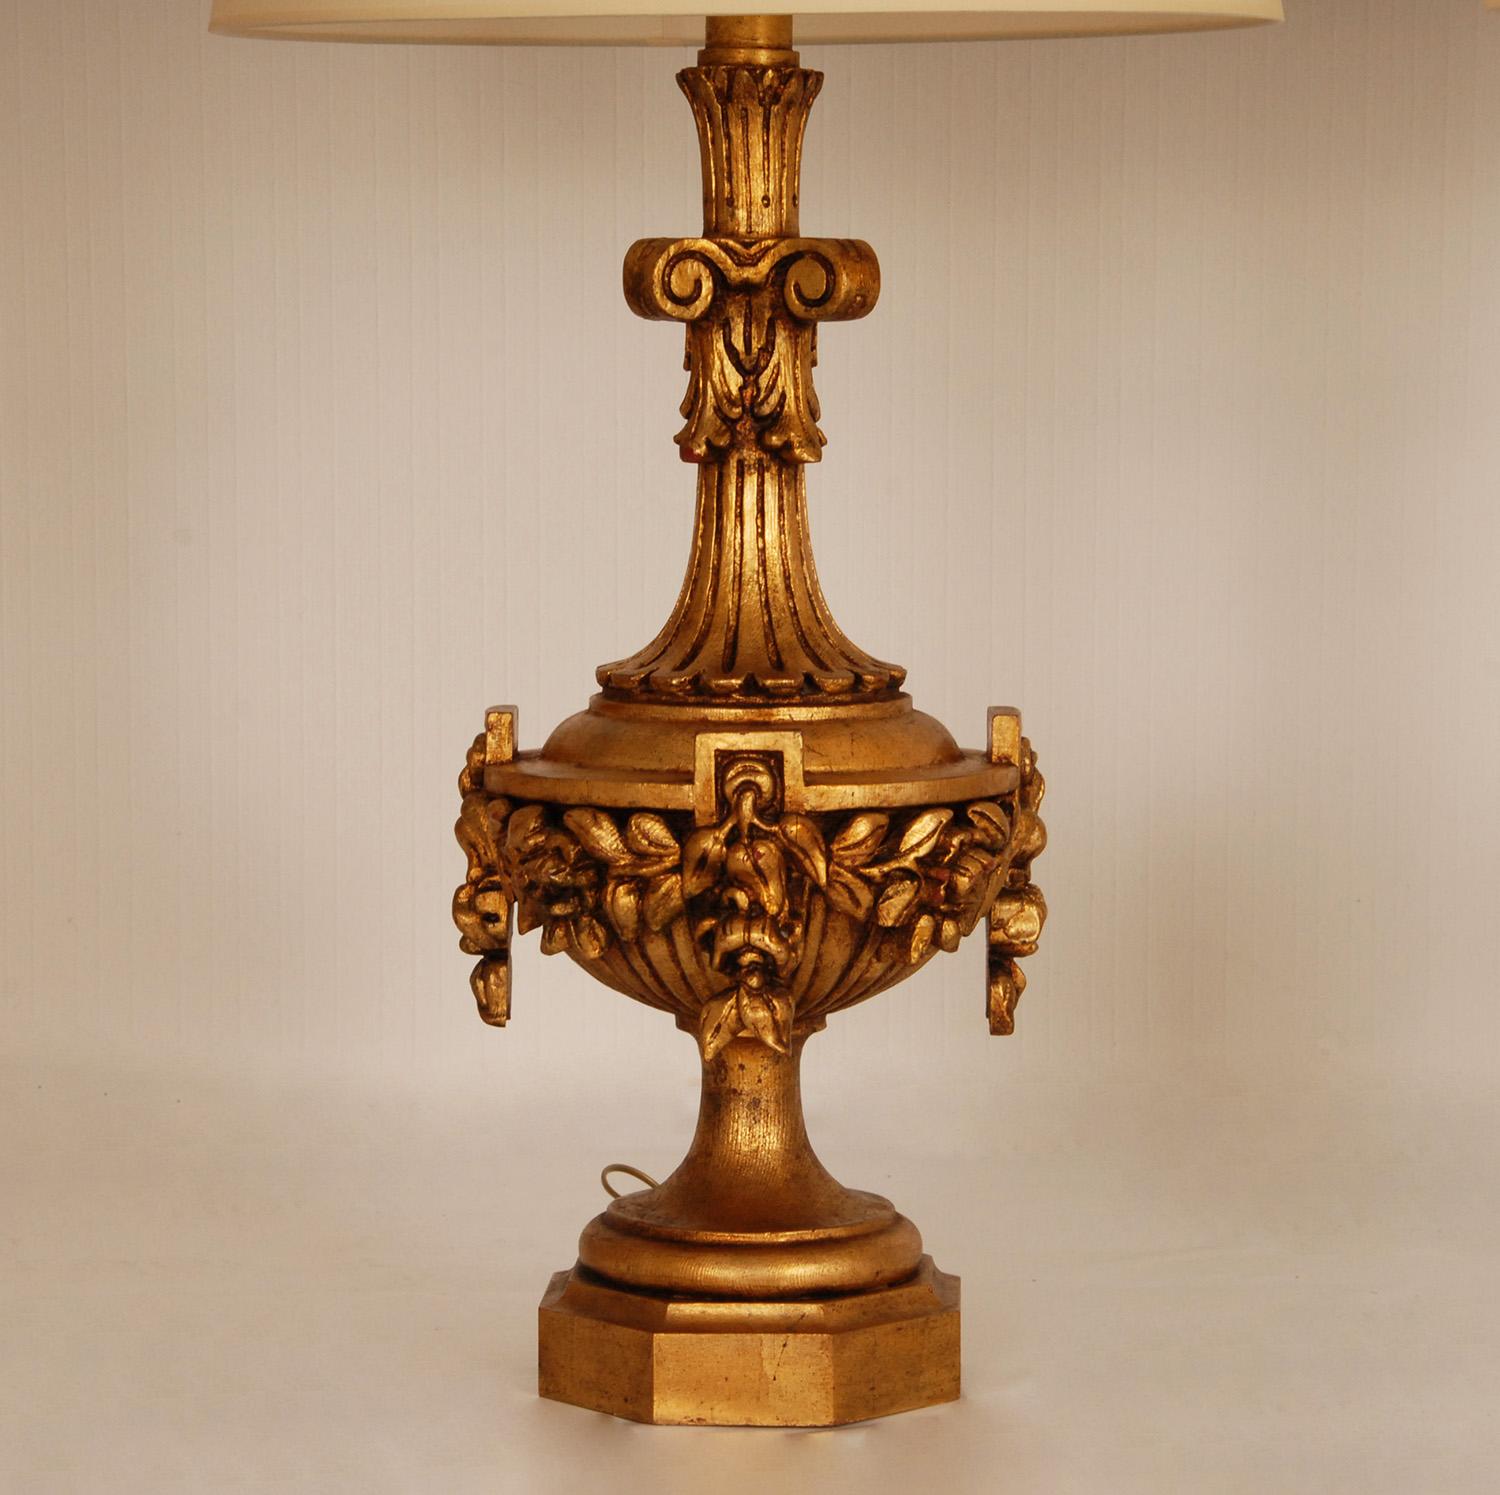 Vintage Italian Gold Giltwood Lamps Carved Neoclassal Vases  Table Lamps a Pair For Sale 1